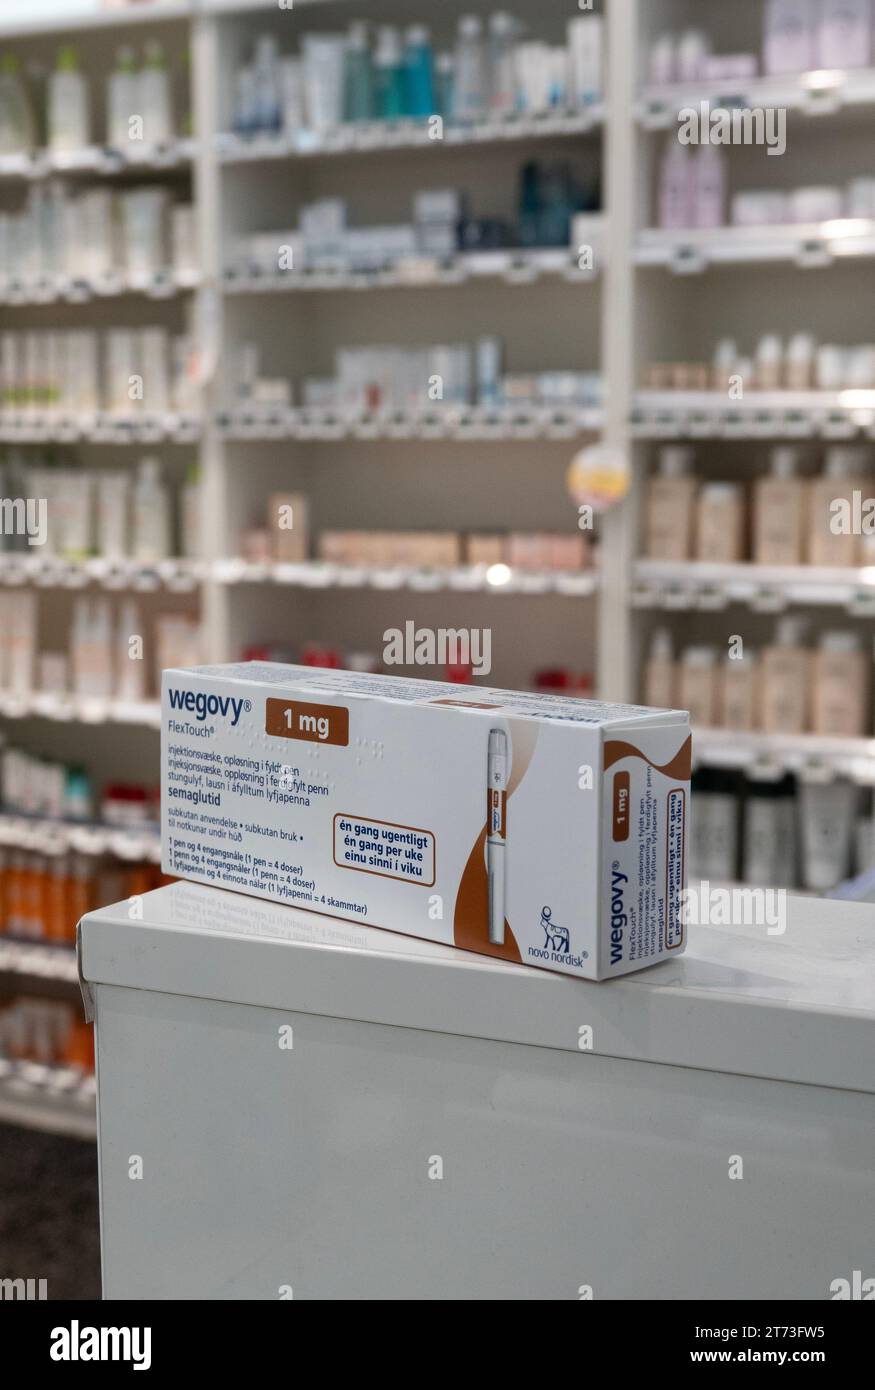 Packaging box of Wegovy (semaglutide) injectable prescription medication, weight-loss drug from Novo Nordisk AS. Pharmacy shop shelves in background. Stock Photo